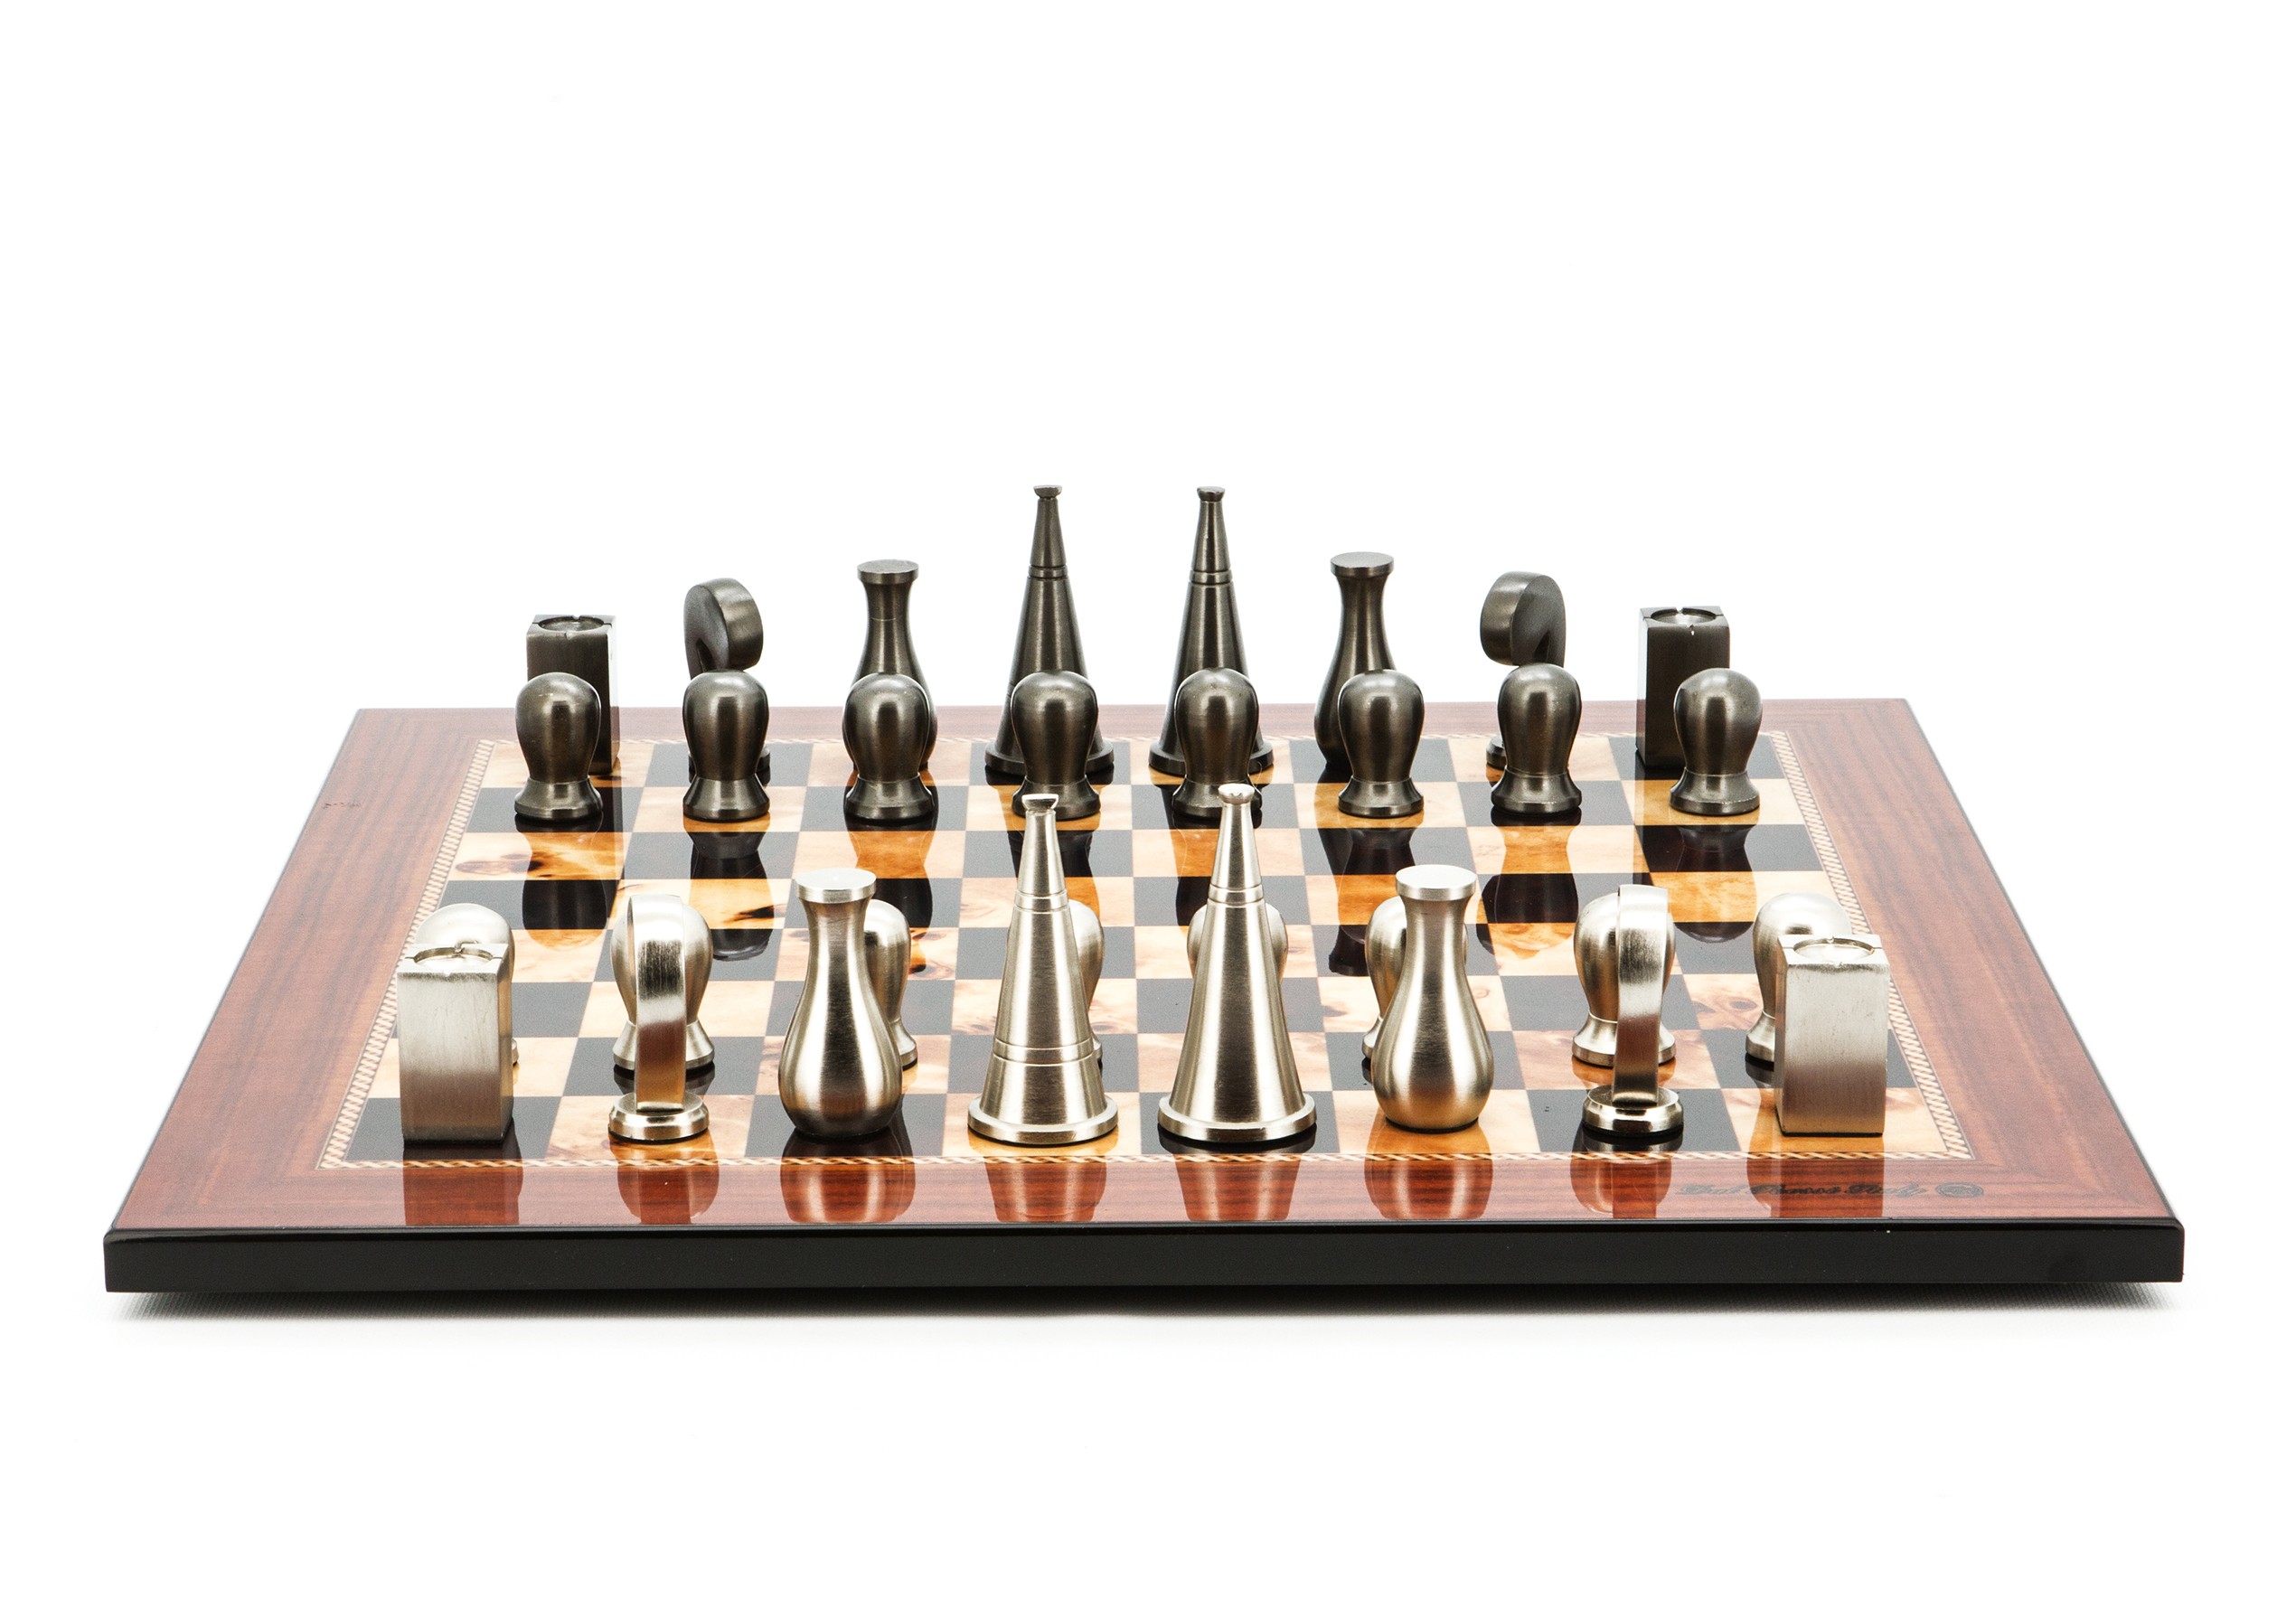 Dal Rossi Italy Chess Set Walnut Finish Flat Board 50cm, With Metal Dark Titanium and Silver 90mm Chessmen